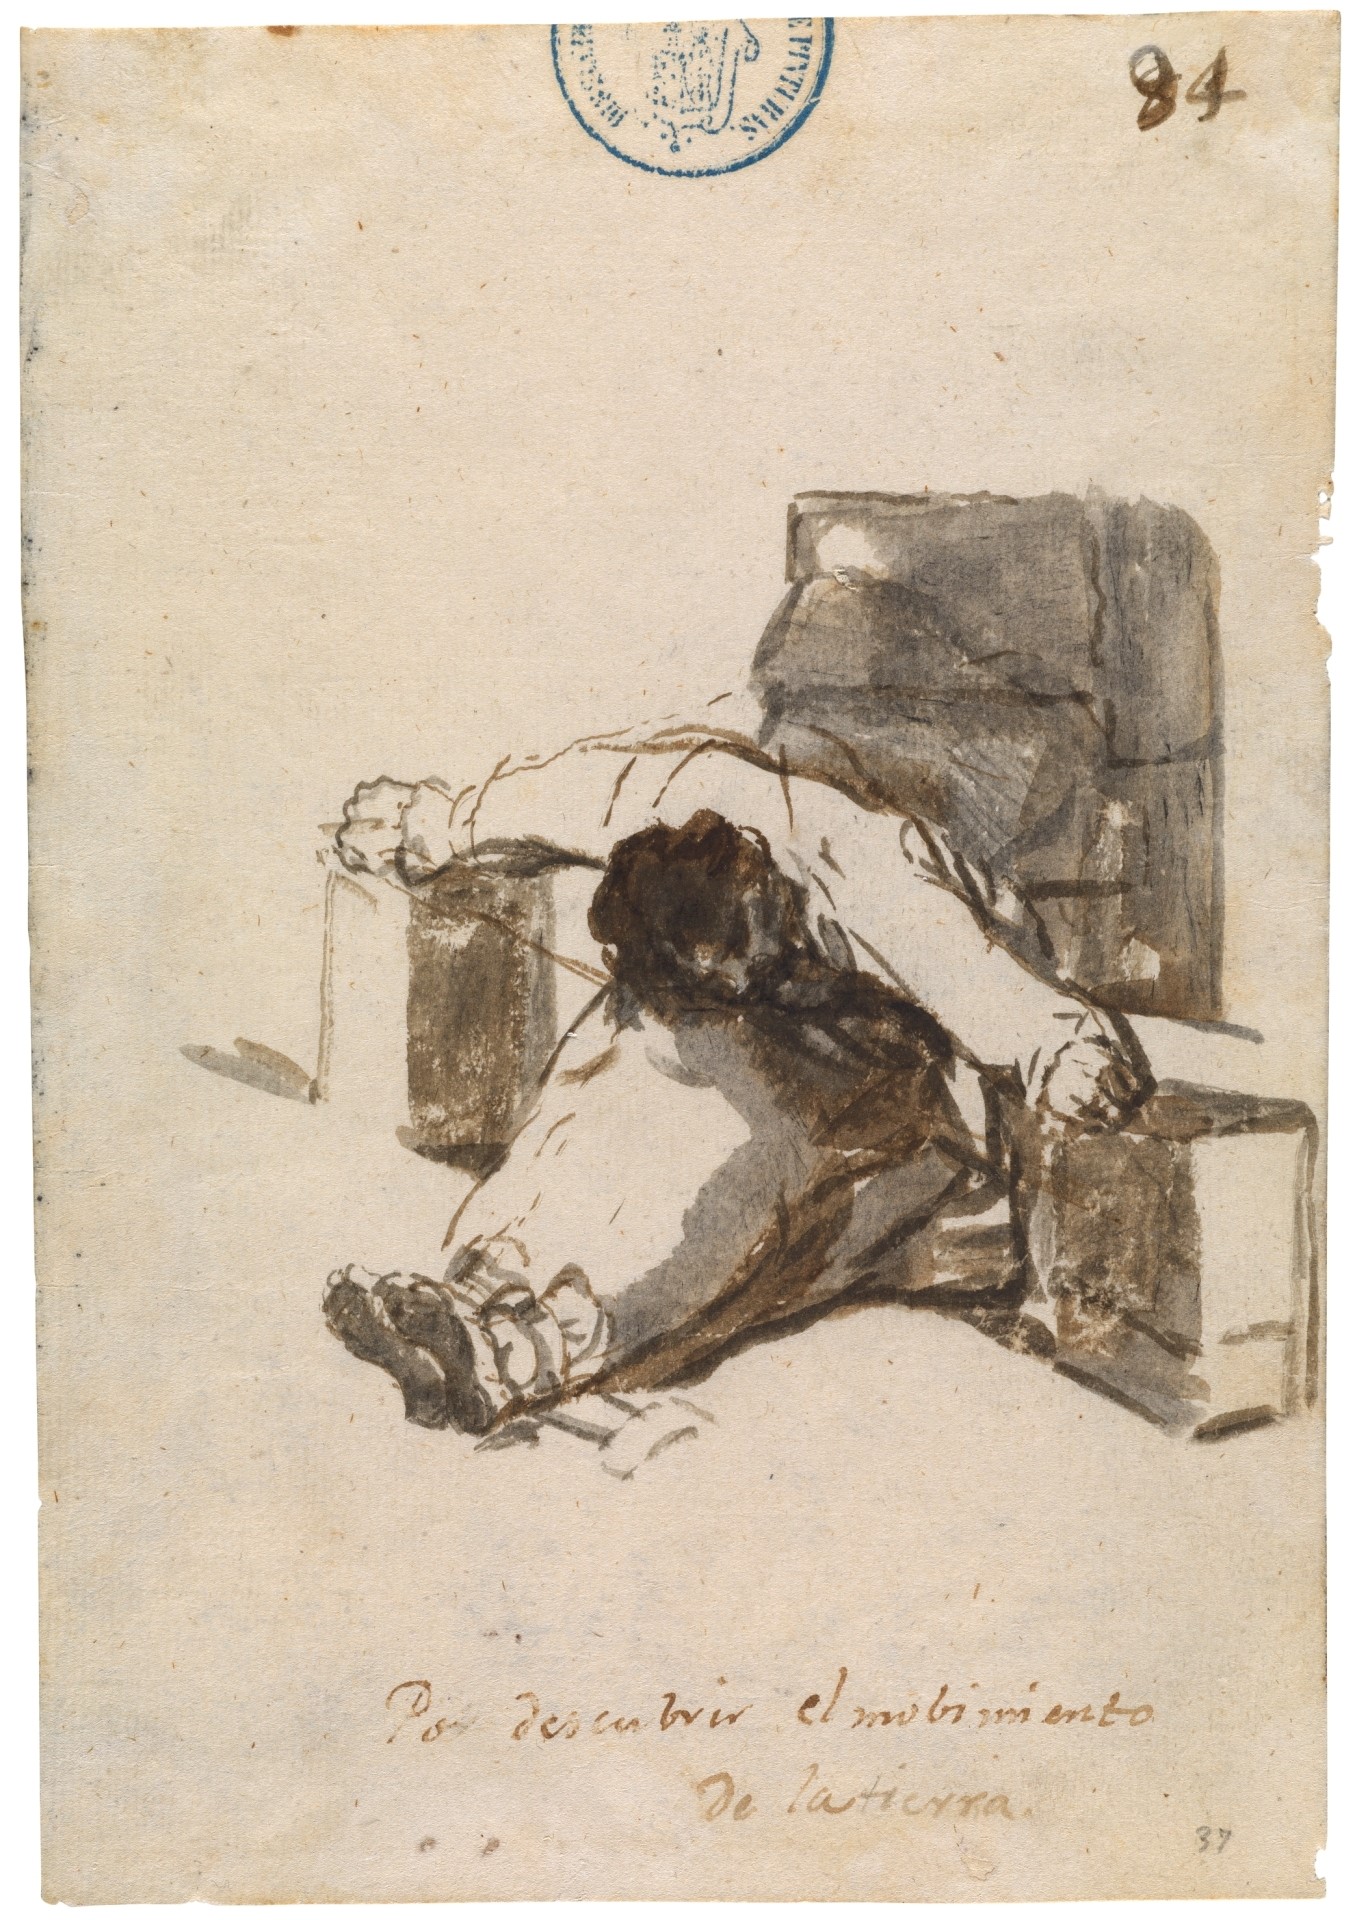 Wash drawing of Galileo by Francisco de Goya (For Discovering the Movement of the Earth, c. 1814-23, Museo Nacional del Prado, Madrid), discussed by Reva Wolf in her forthcoming essay, 